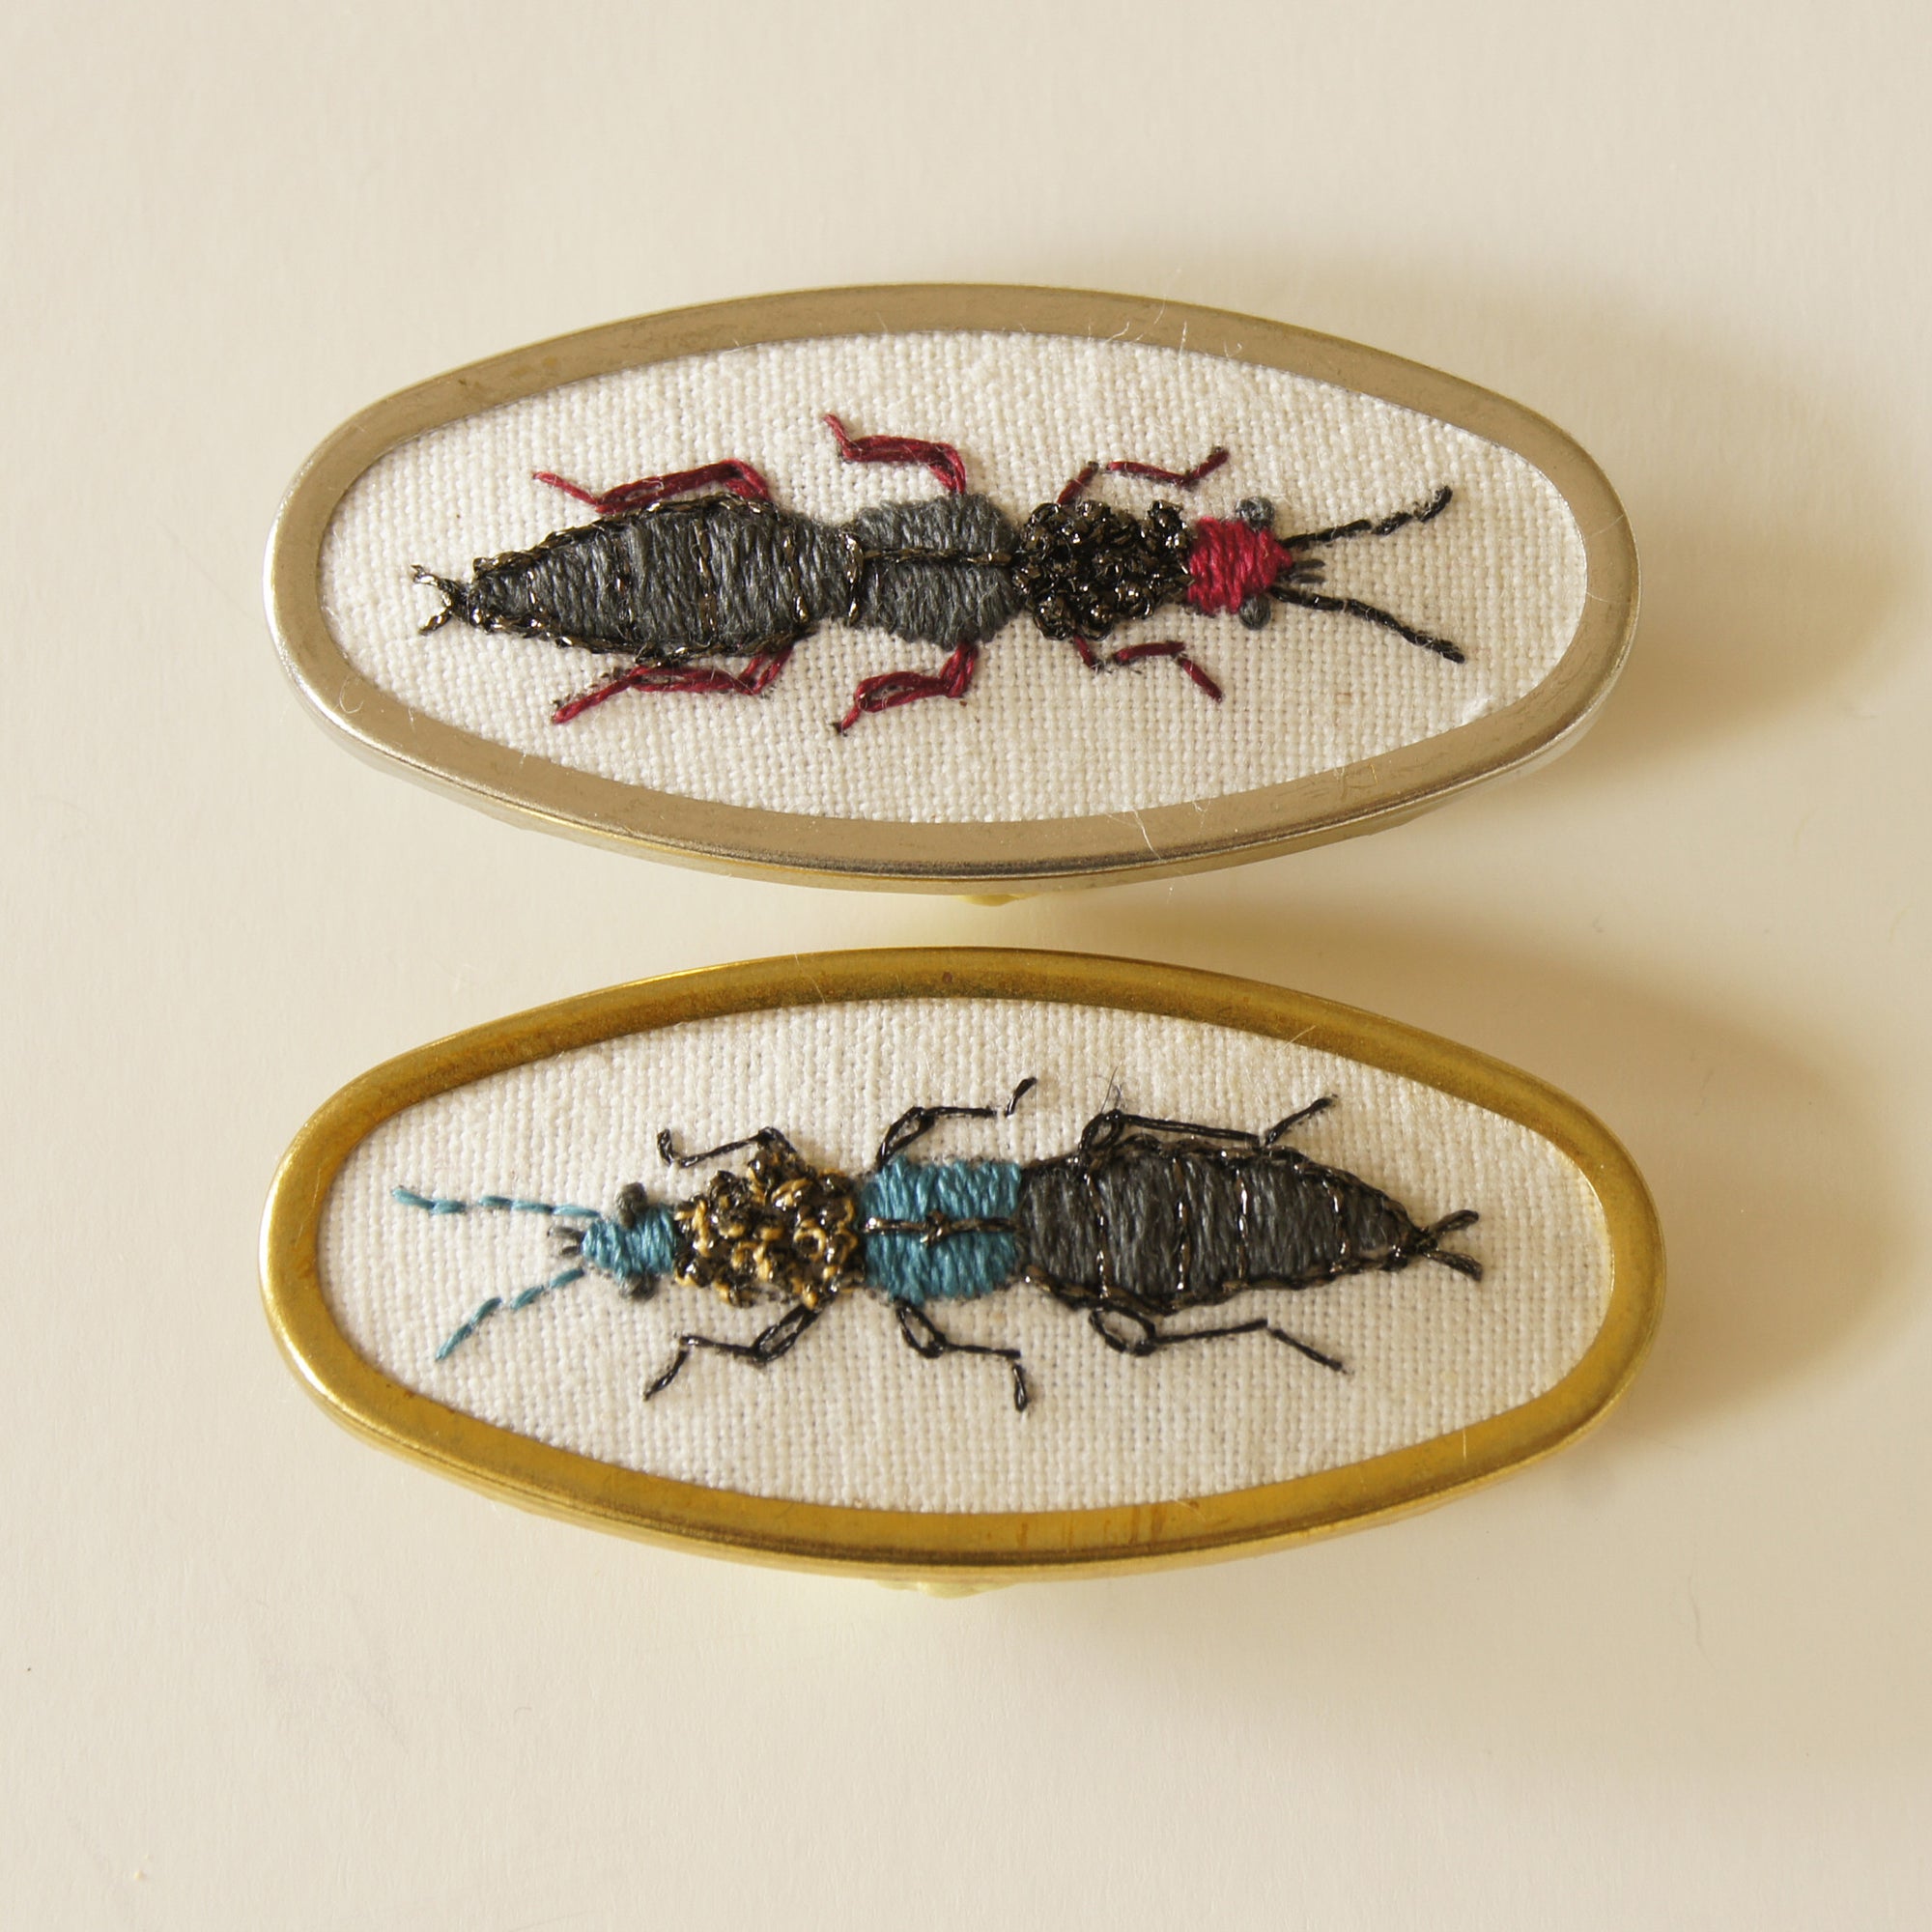 Hand Embroidered Rove Beetle Brooch Entomology Jewelry